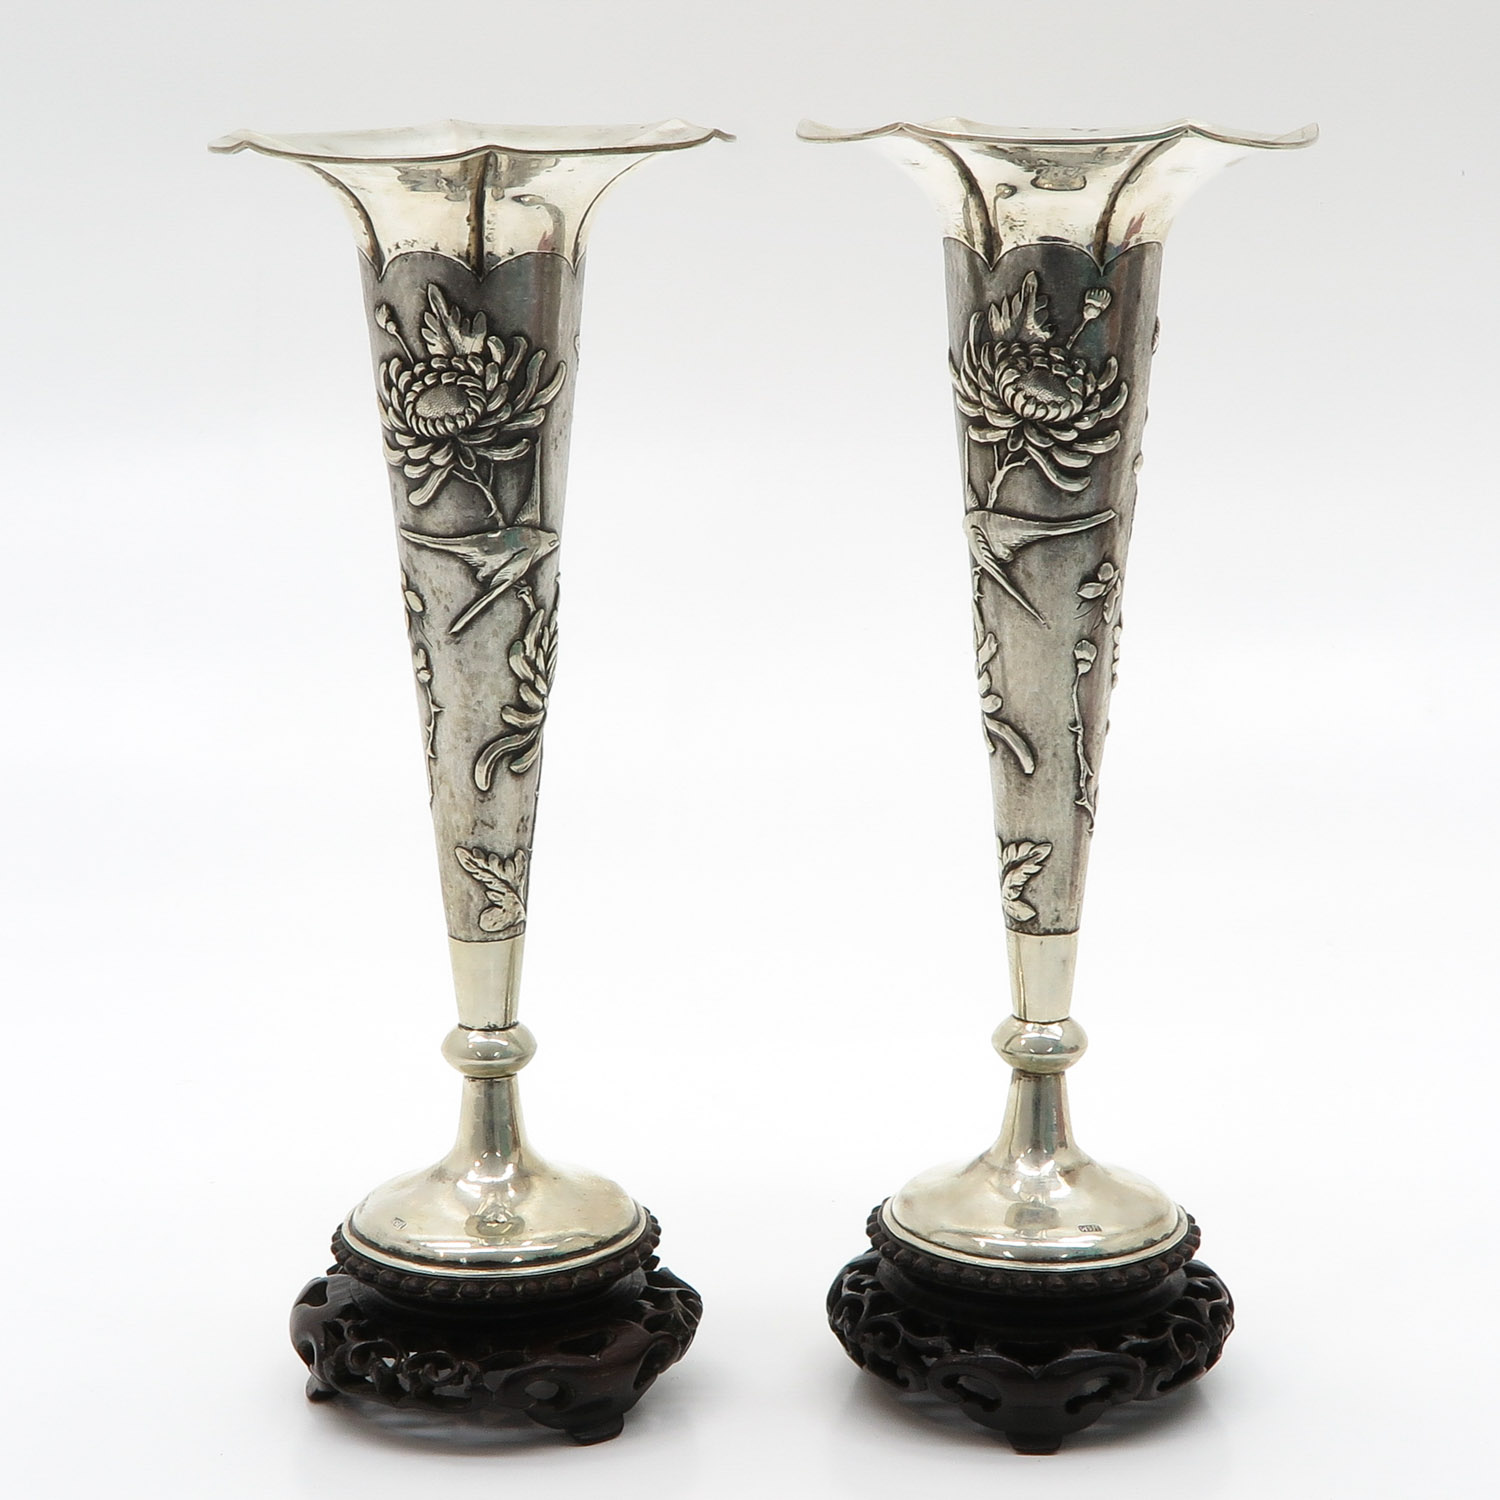 Lot of 2 Chinese Silver Vases - Image 3 of 7